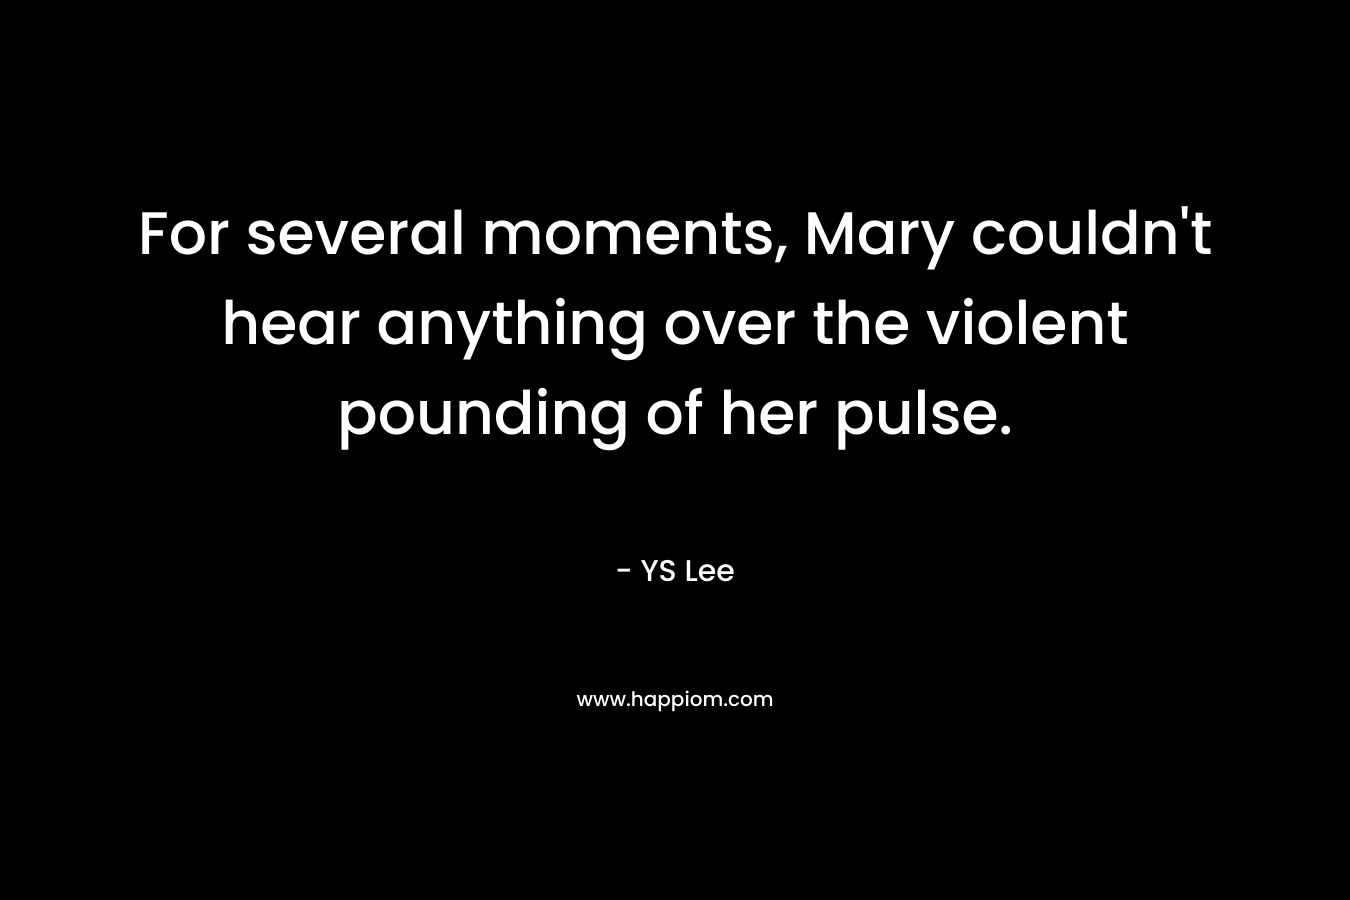 For several moments, Mary couldn't hear anything over the violent pounding of her pulse.